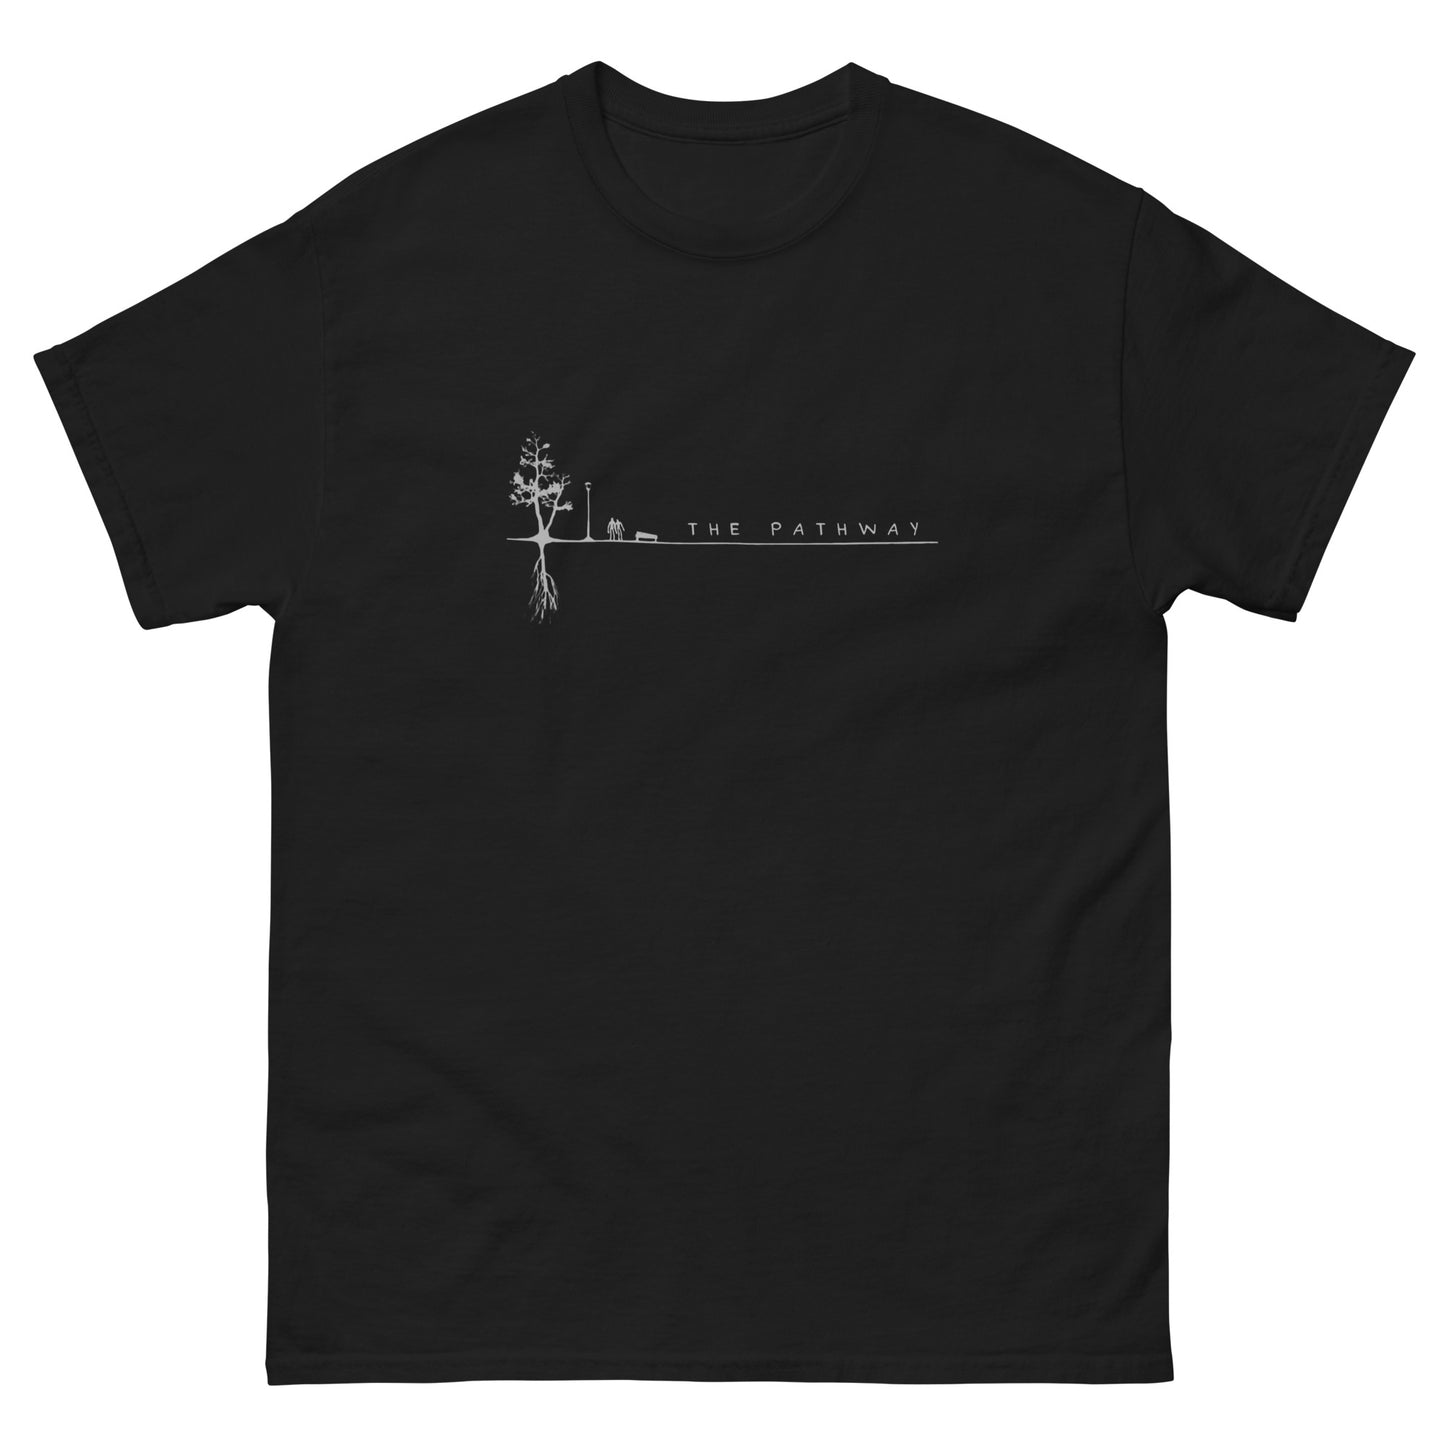 The Pathway T-Shirt